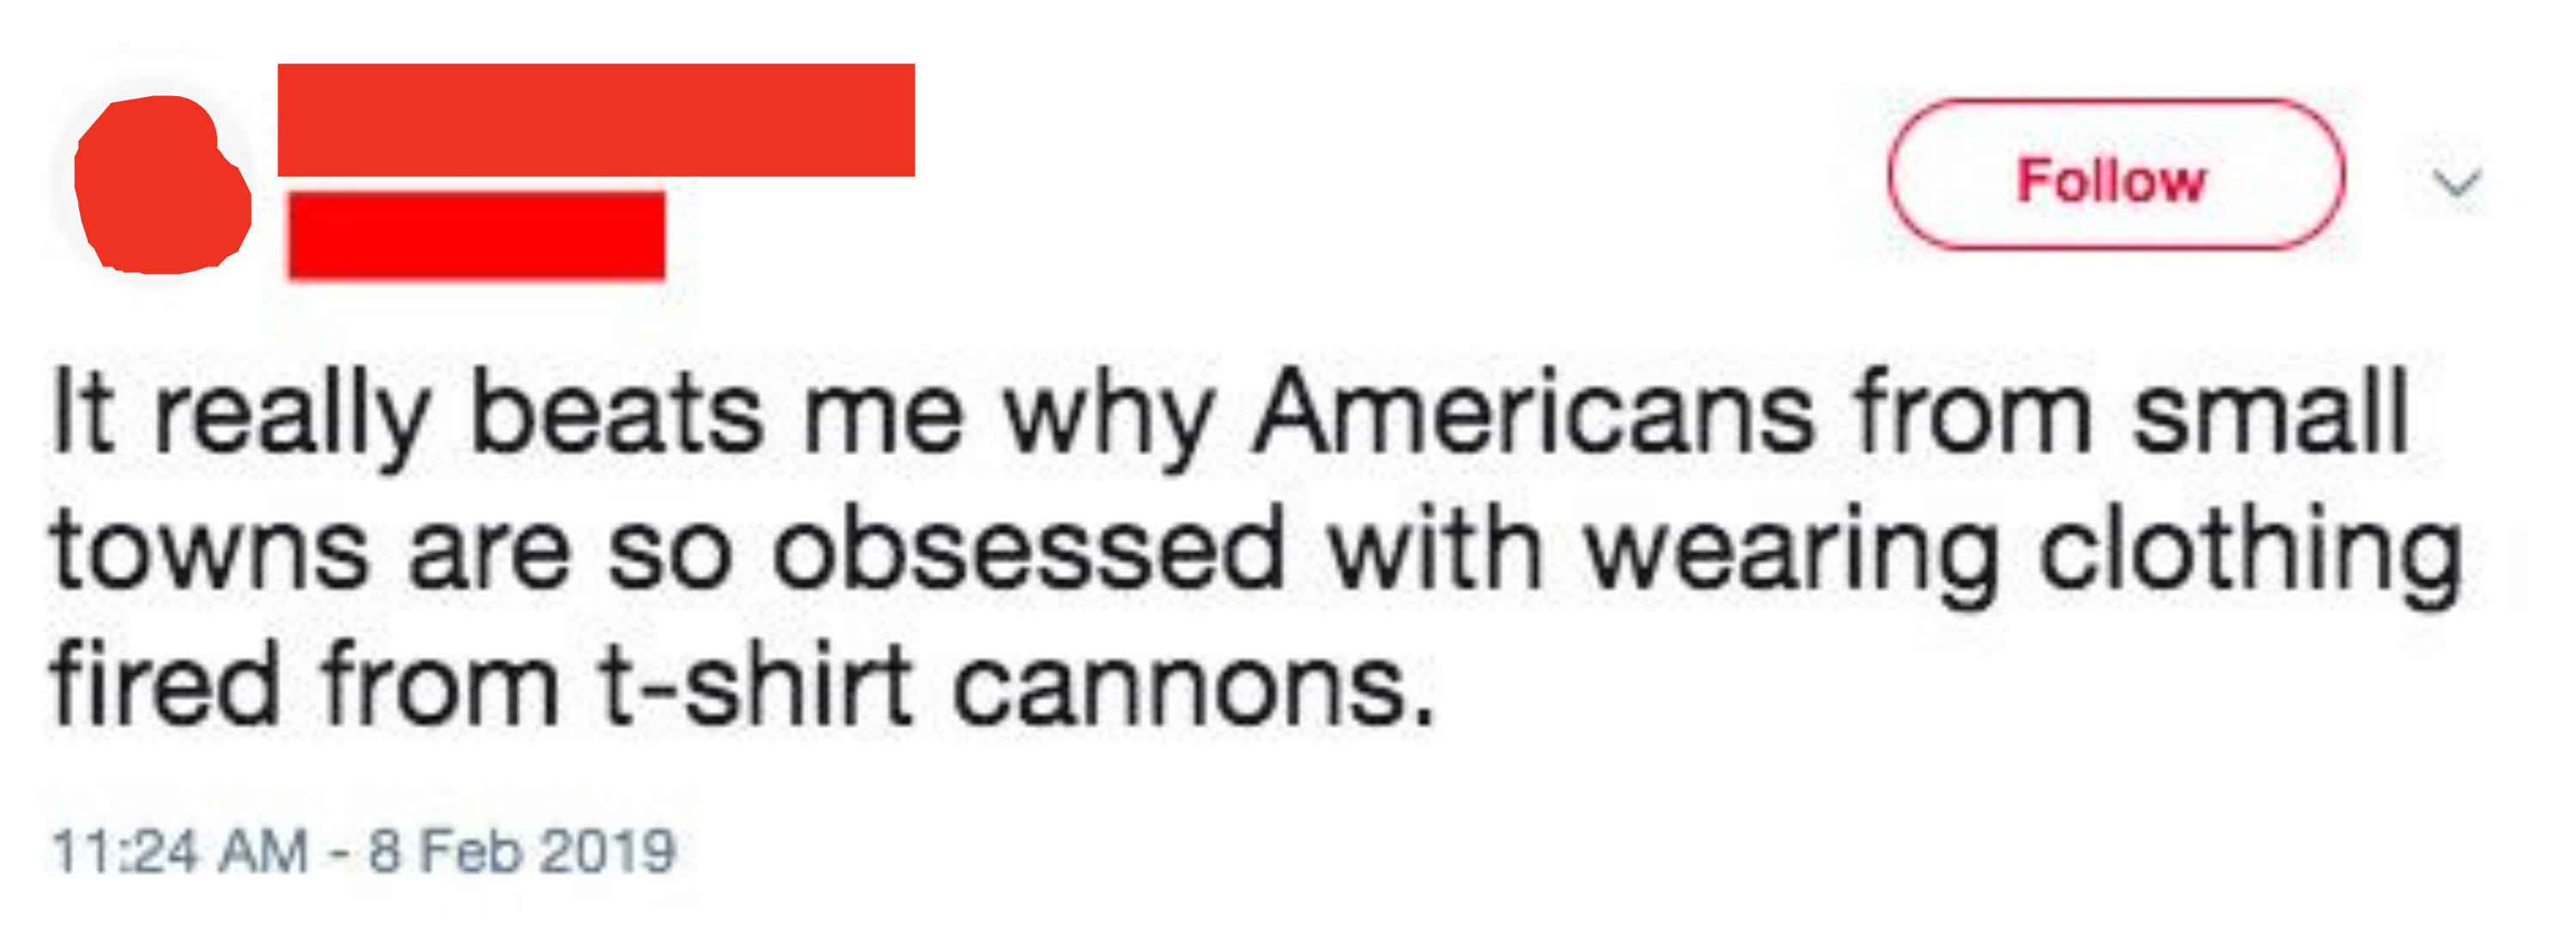 It really beats me why Americans from small towns are so obsessed with wearing clothing fired from t-shirt cannons